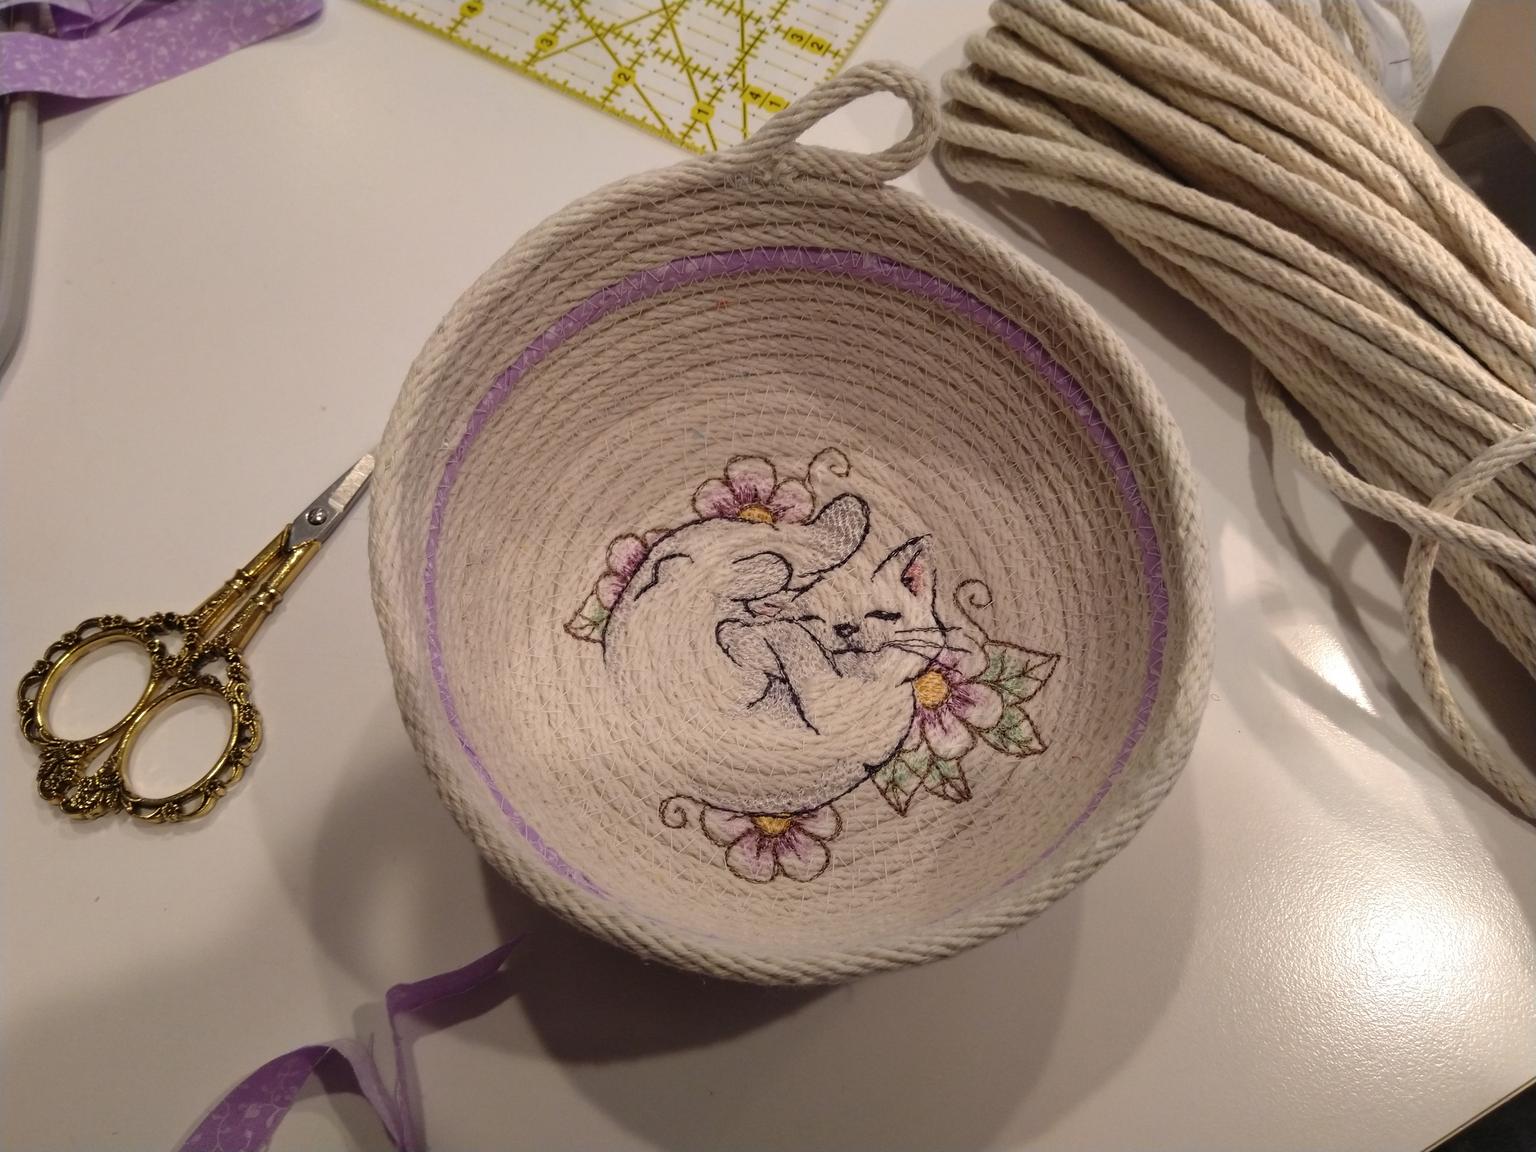 Today in "weird things to embroider on": clothesline